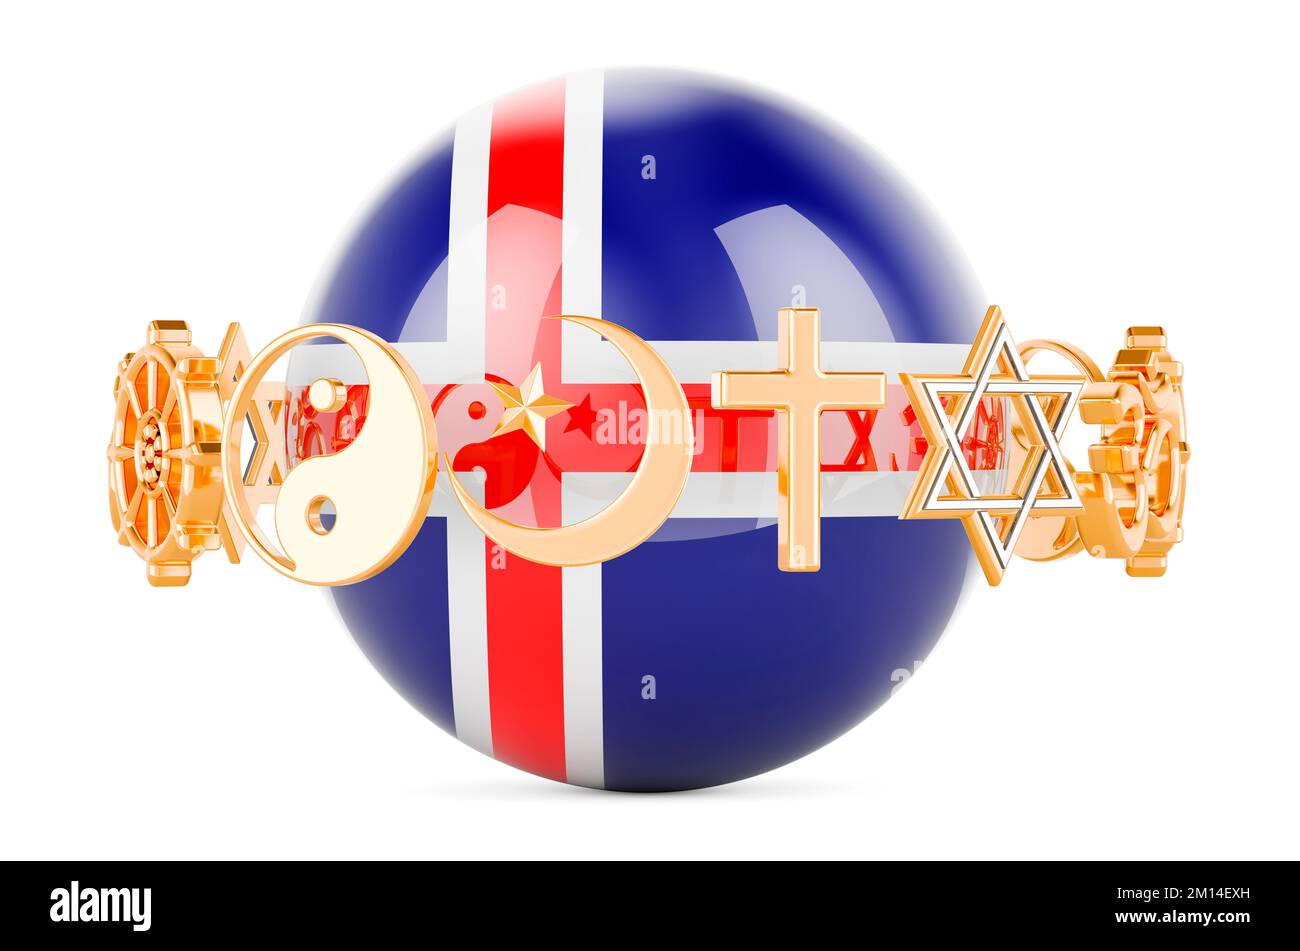 Icelandic flag painted on sphere with religions symbols around, 3D rendering isolated on white background Stock Photo